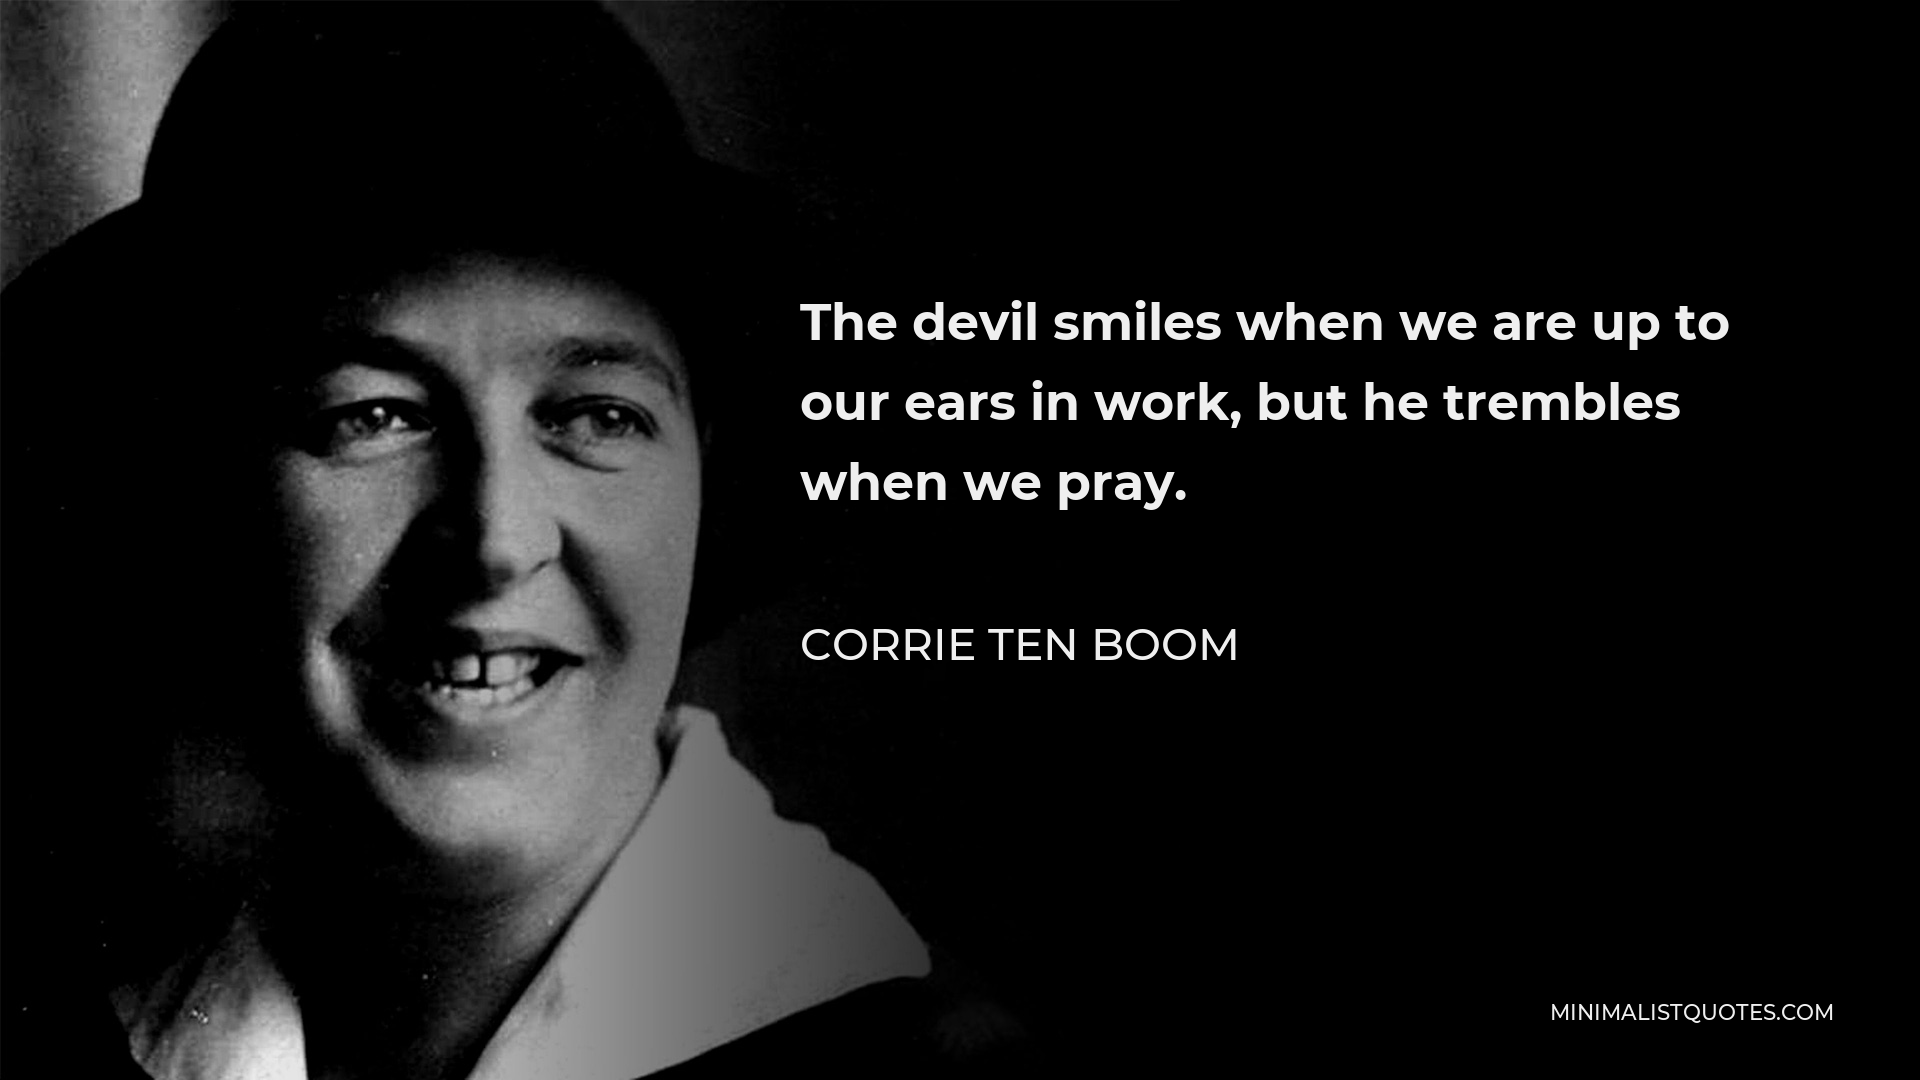 Corrie ten Boom Quote - The devil smiles when we are up to our ears in work, but he trembles when we pray.